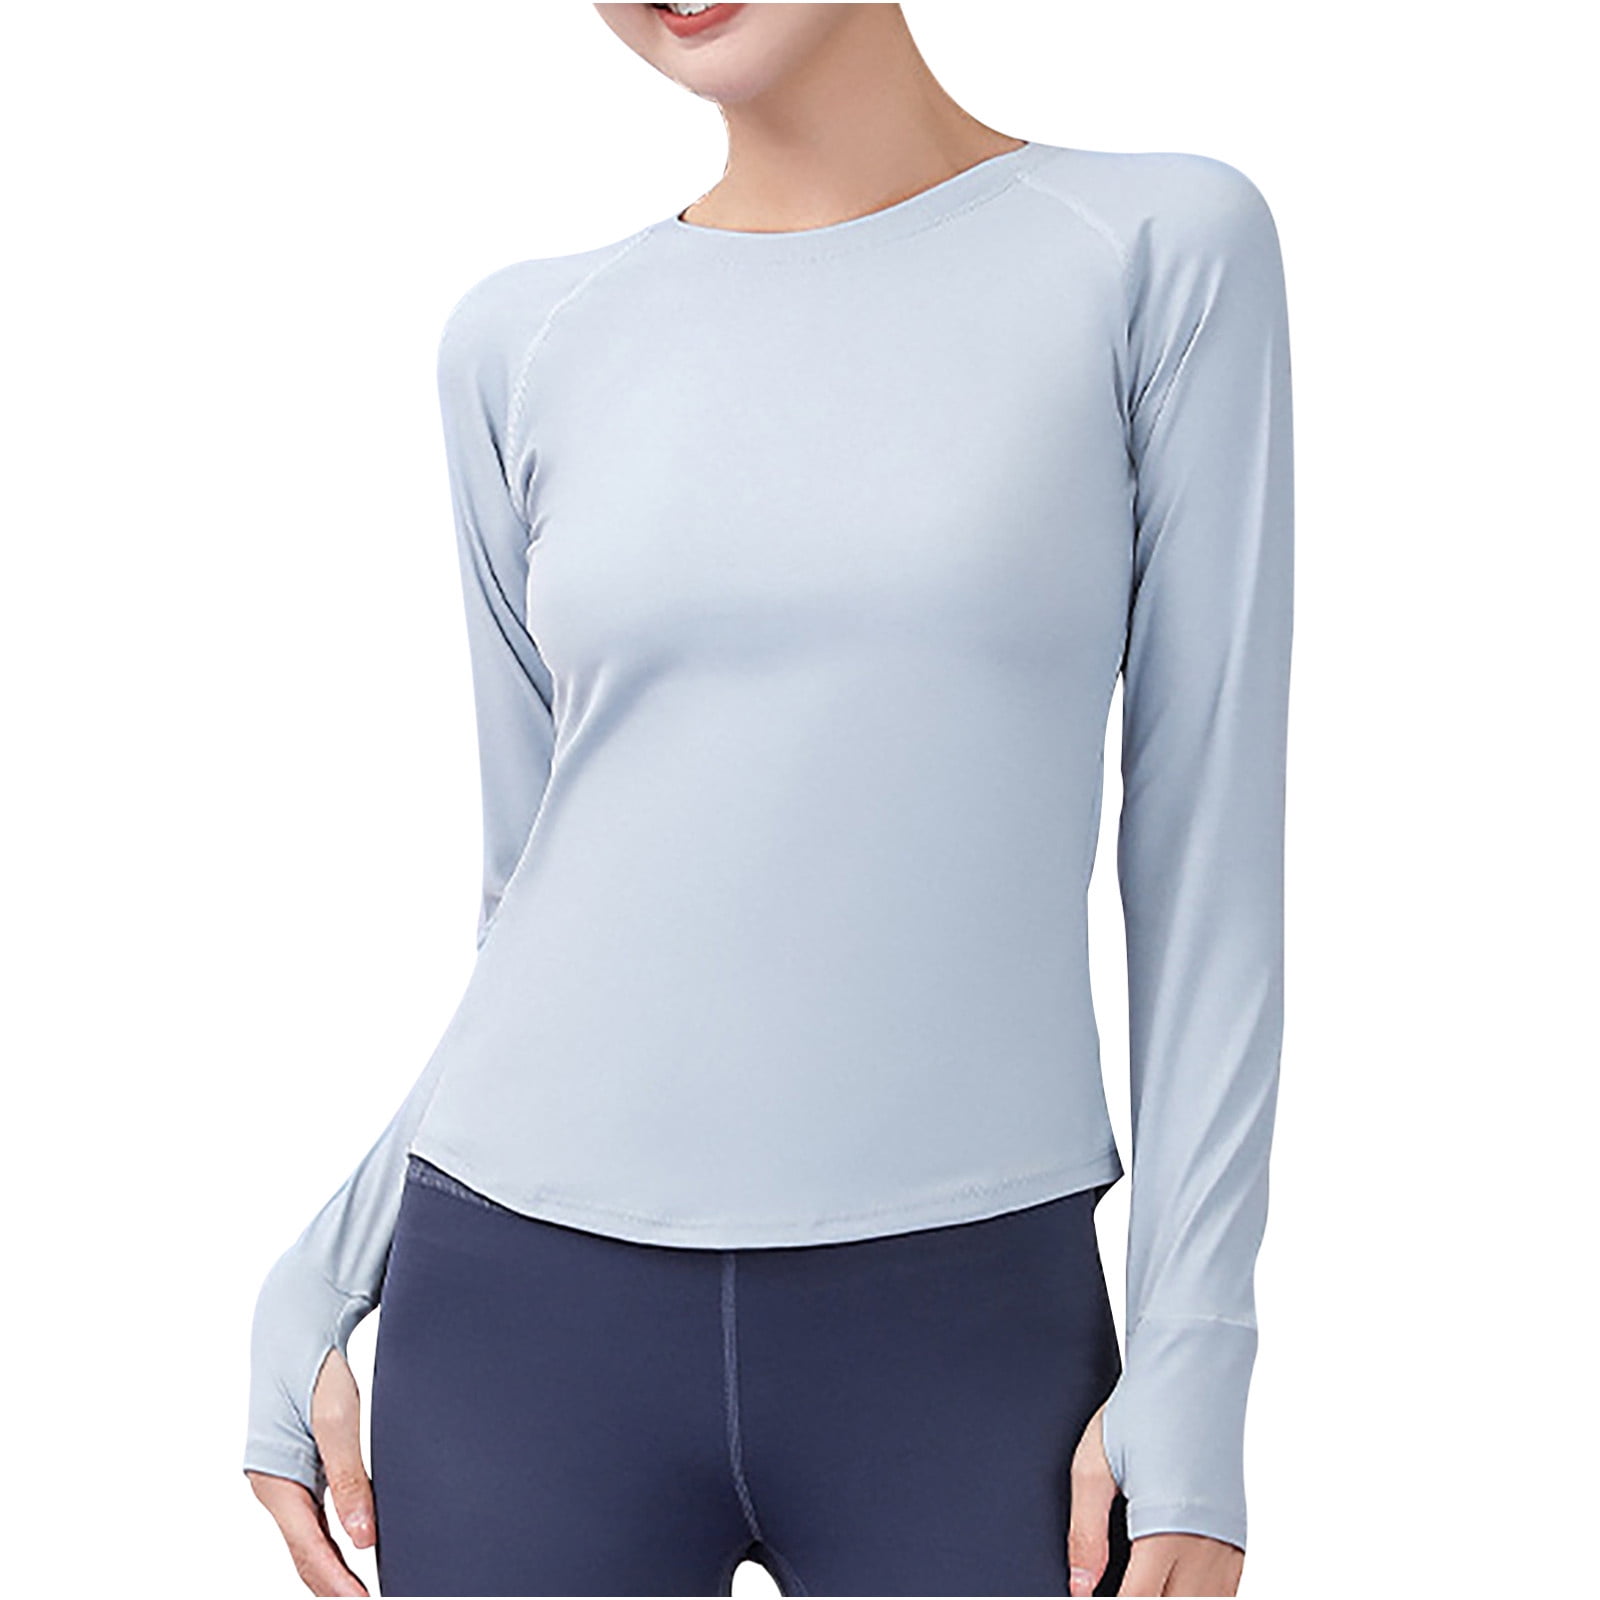  Compression Shirts for Women Backless Tops Yoga